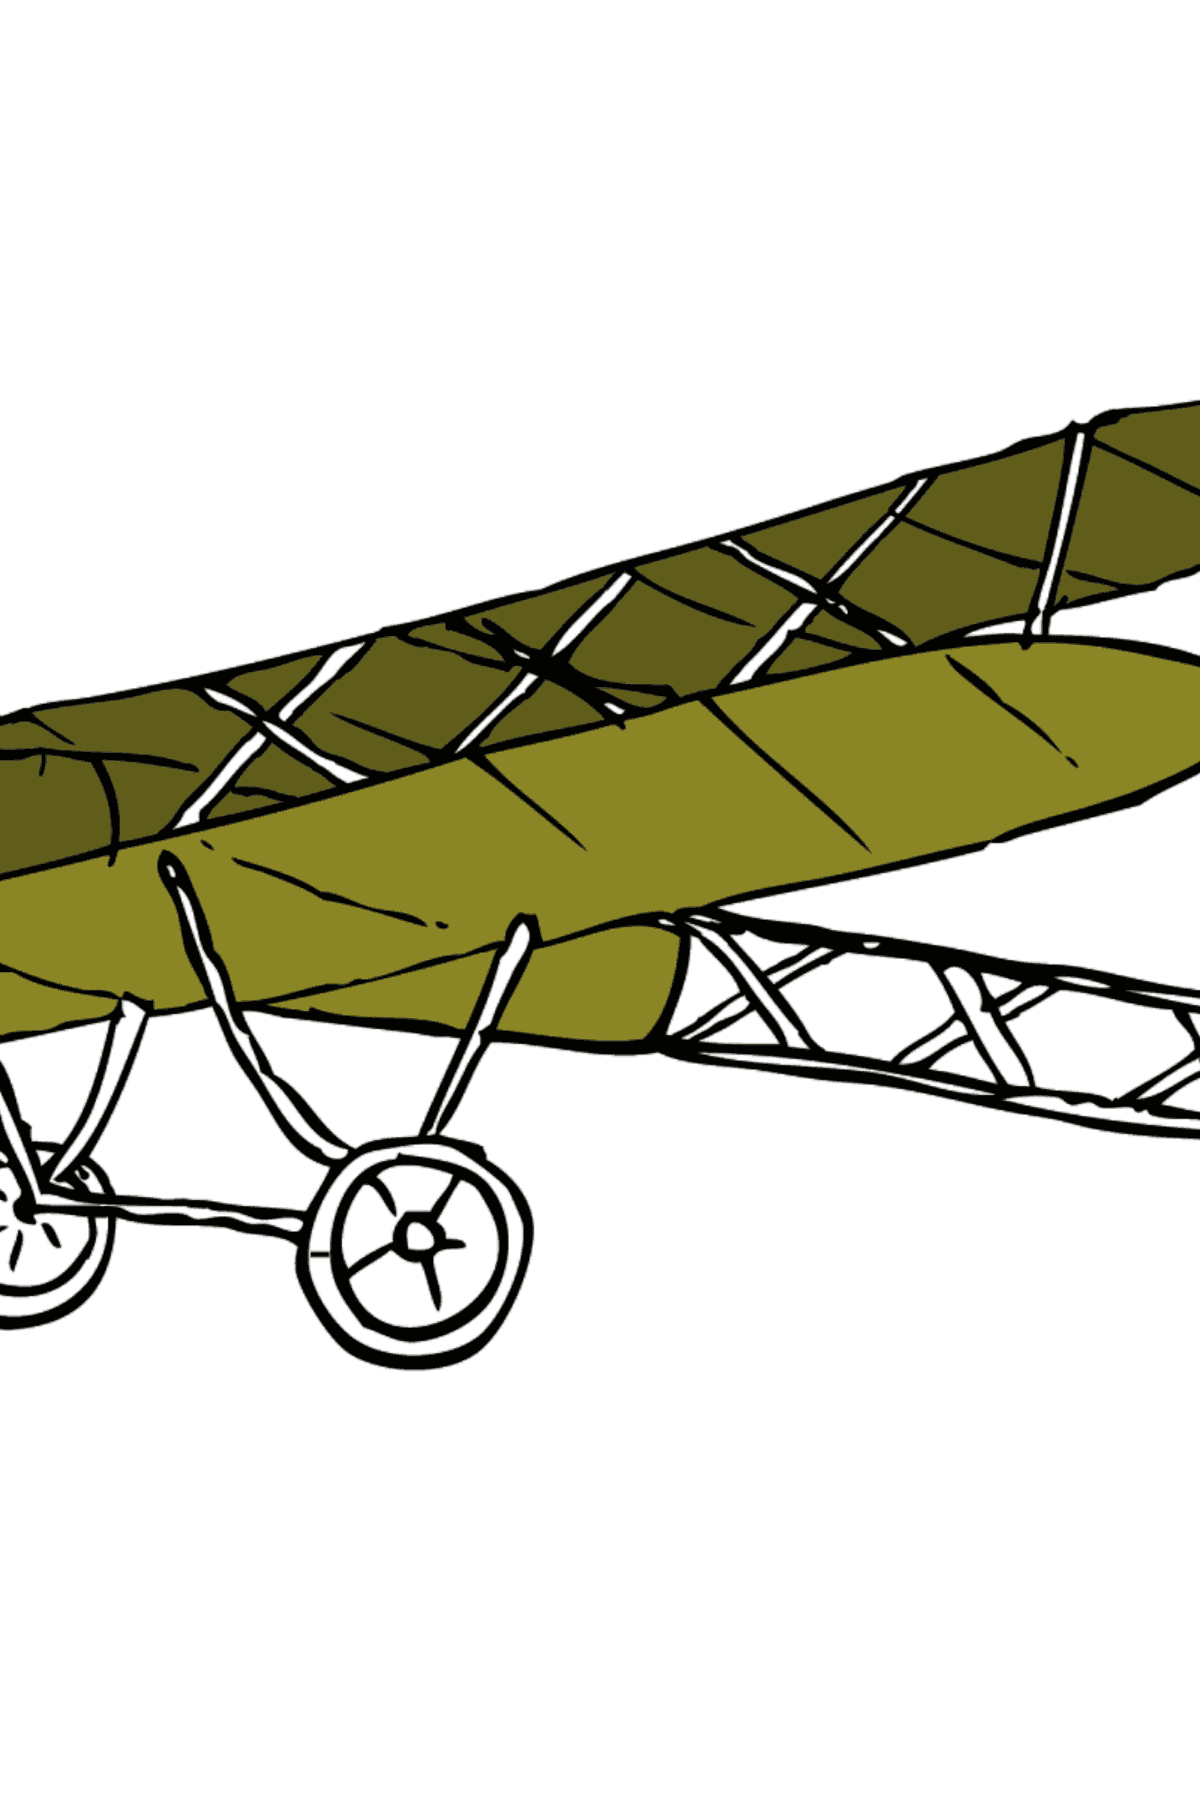 Military Biplane Coloring Page - Coloring by Symbols for Kids